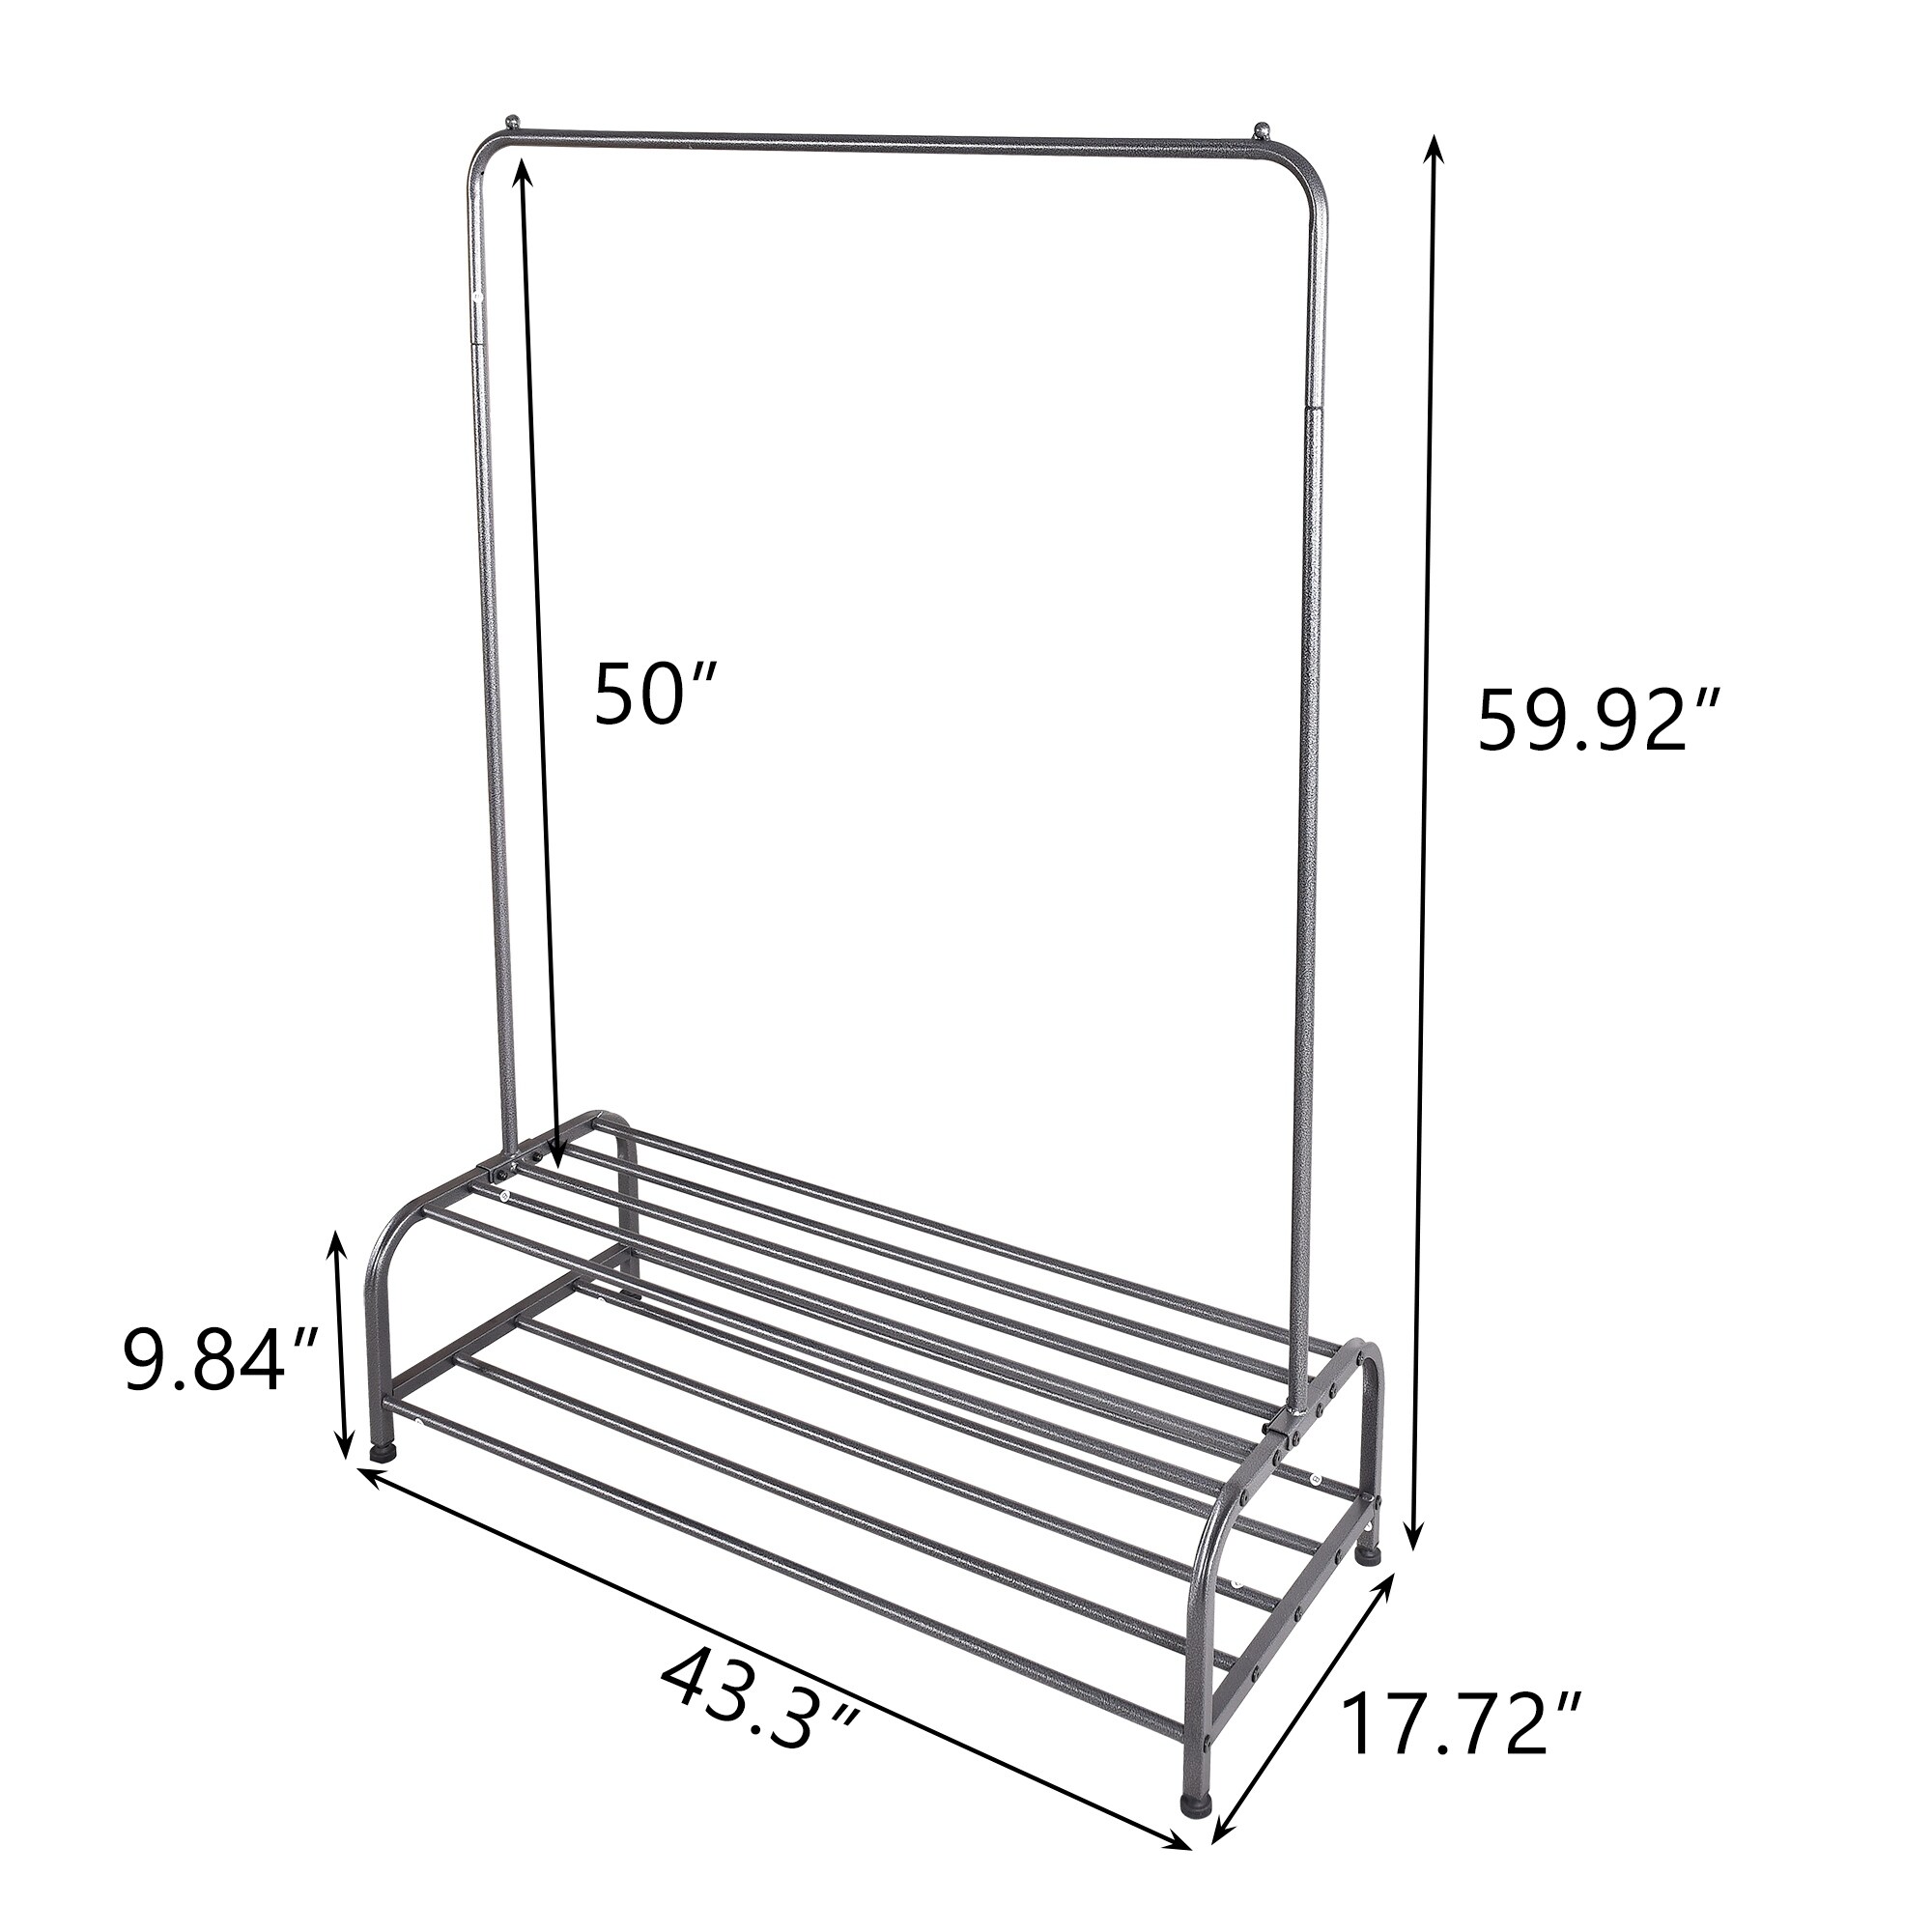 https://ak1.ostkcdn.com/images/products/is/images/direct/c17882d7cffb47f4bbb084c597bb00f7d74a41f3/Clothing-Garment-Rack-with-Shelves-Metal-Cloth-Hanger-Rack.jpg